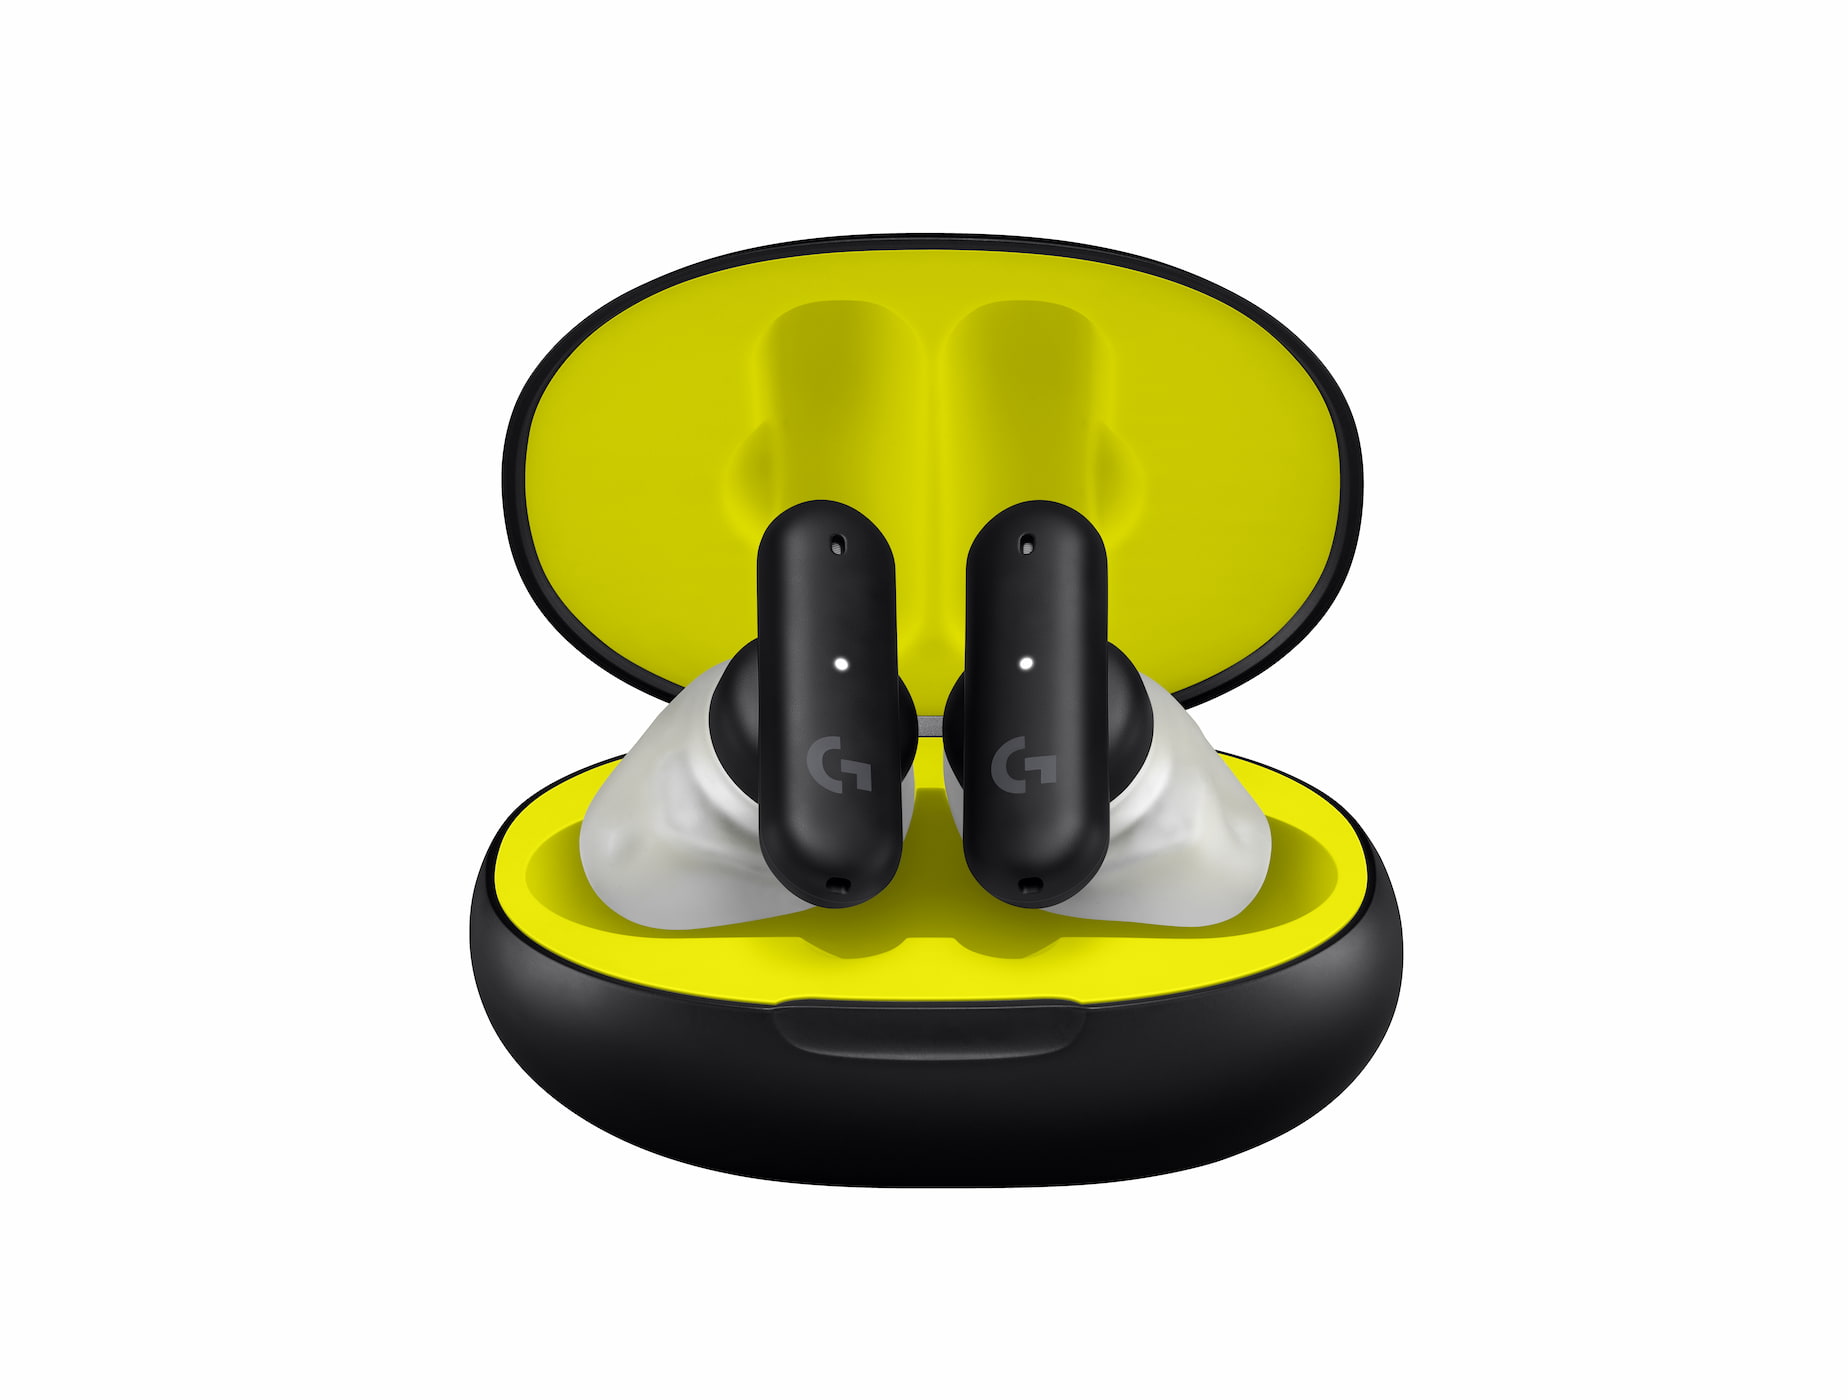 Logitech G Fits gaming earbuds reshape to fit your ear